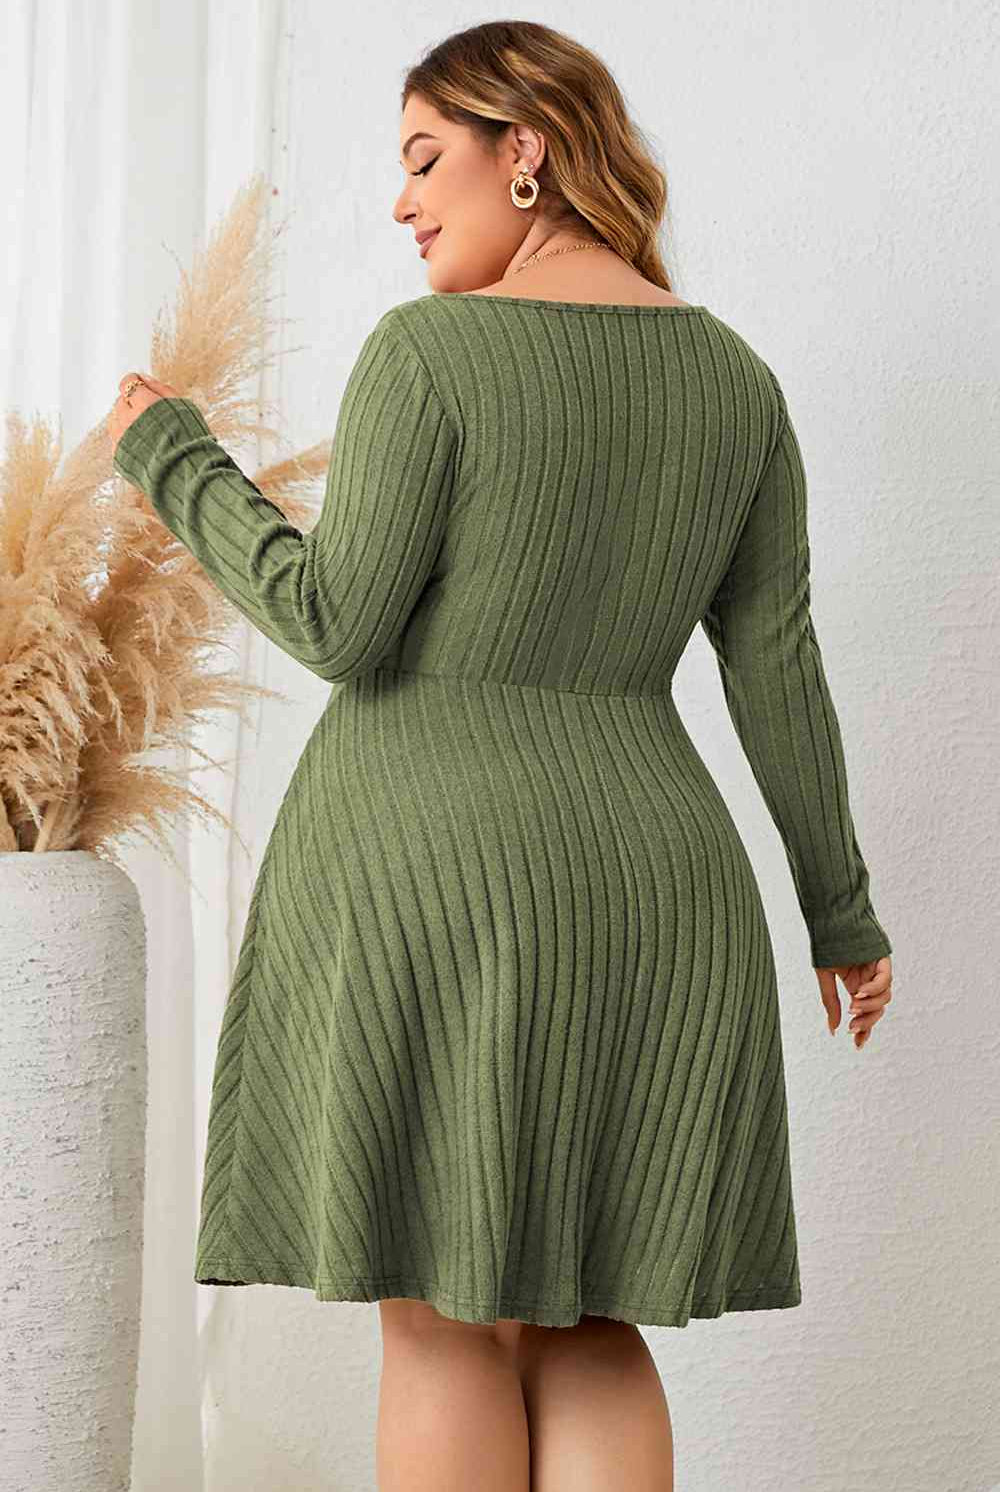 Gray Plus Size Sweetheart Neck Long Sleeve Ribbed Dress Plus Size Clothes